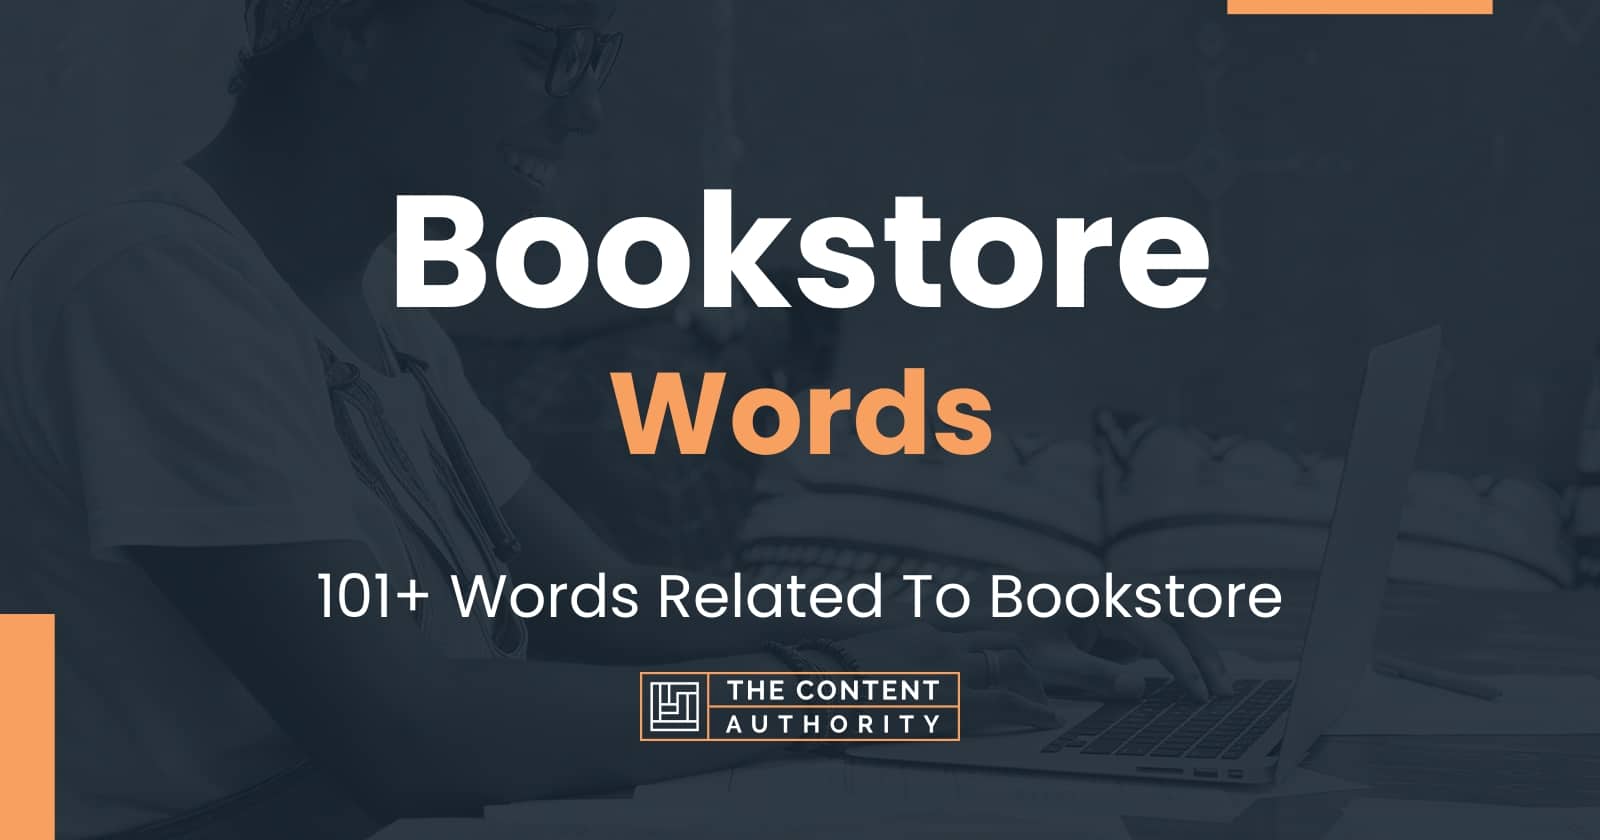 Bookstore Words - 101+ Words Related To Bookstore